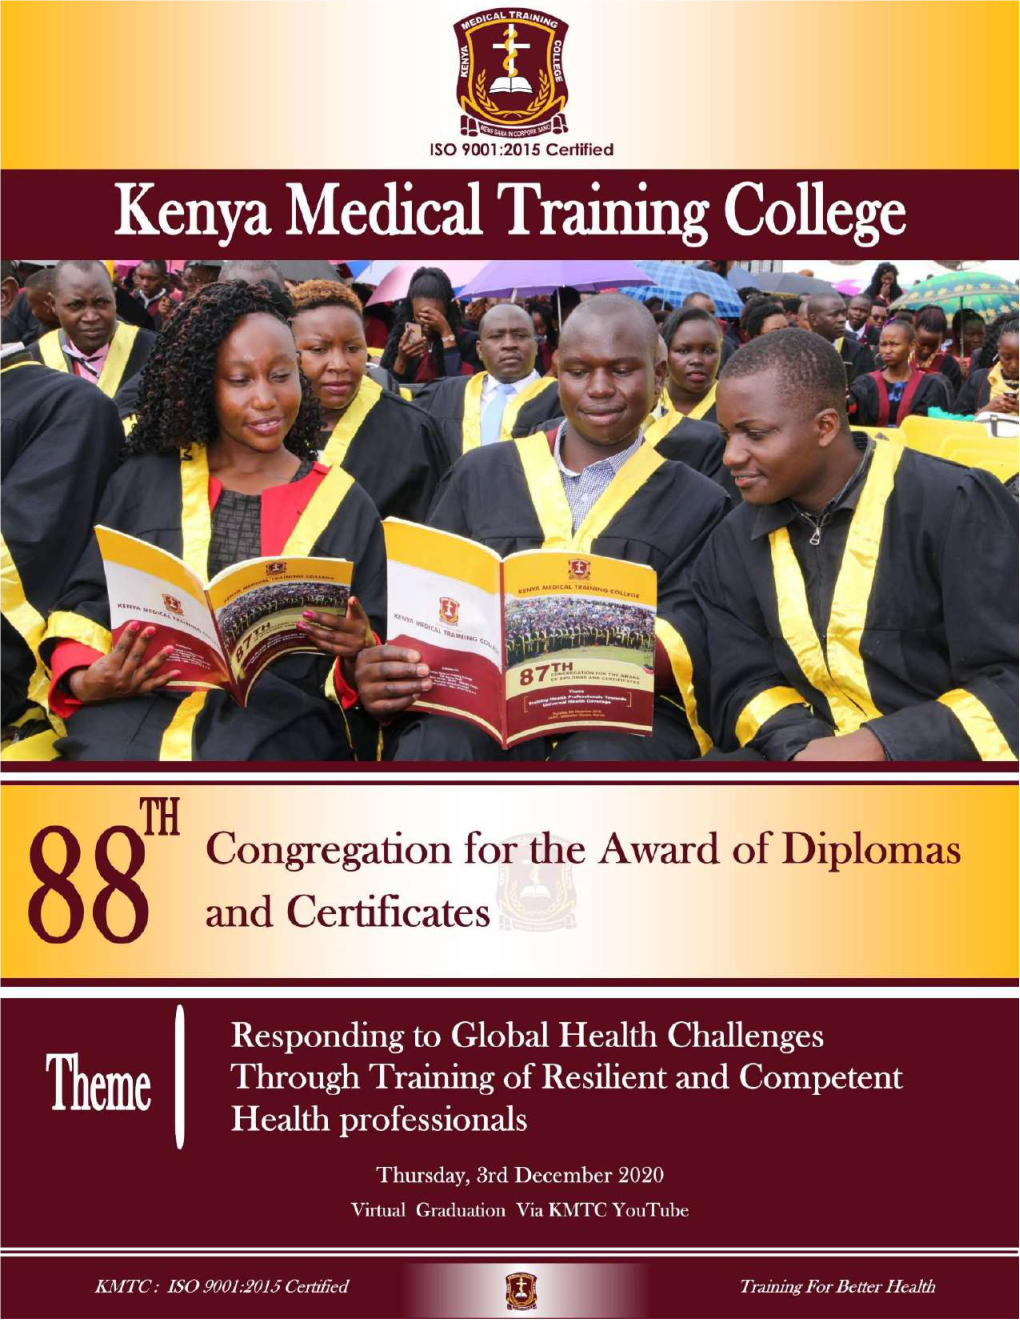 Kmtc Graduation Booklet for the Year 2020